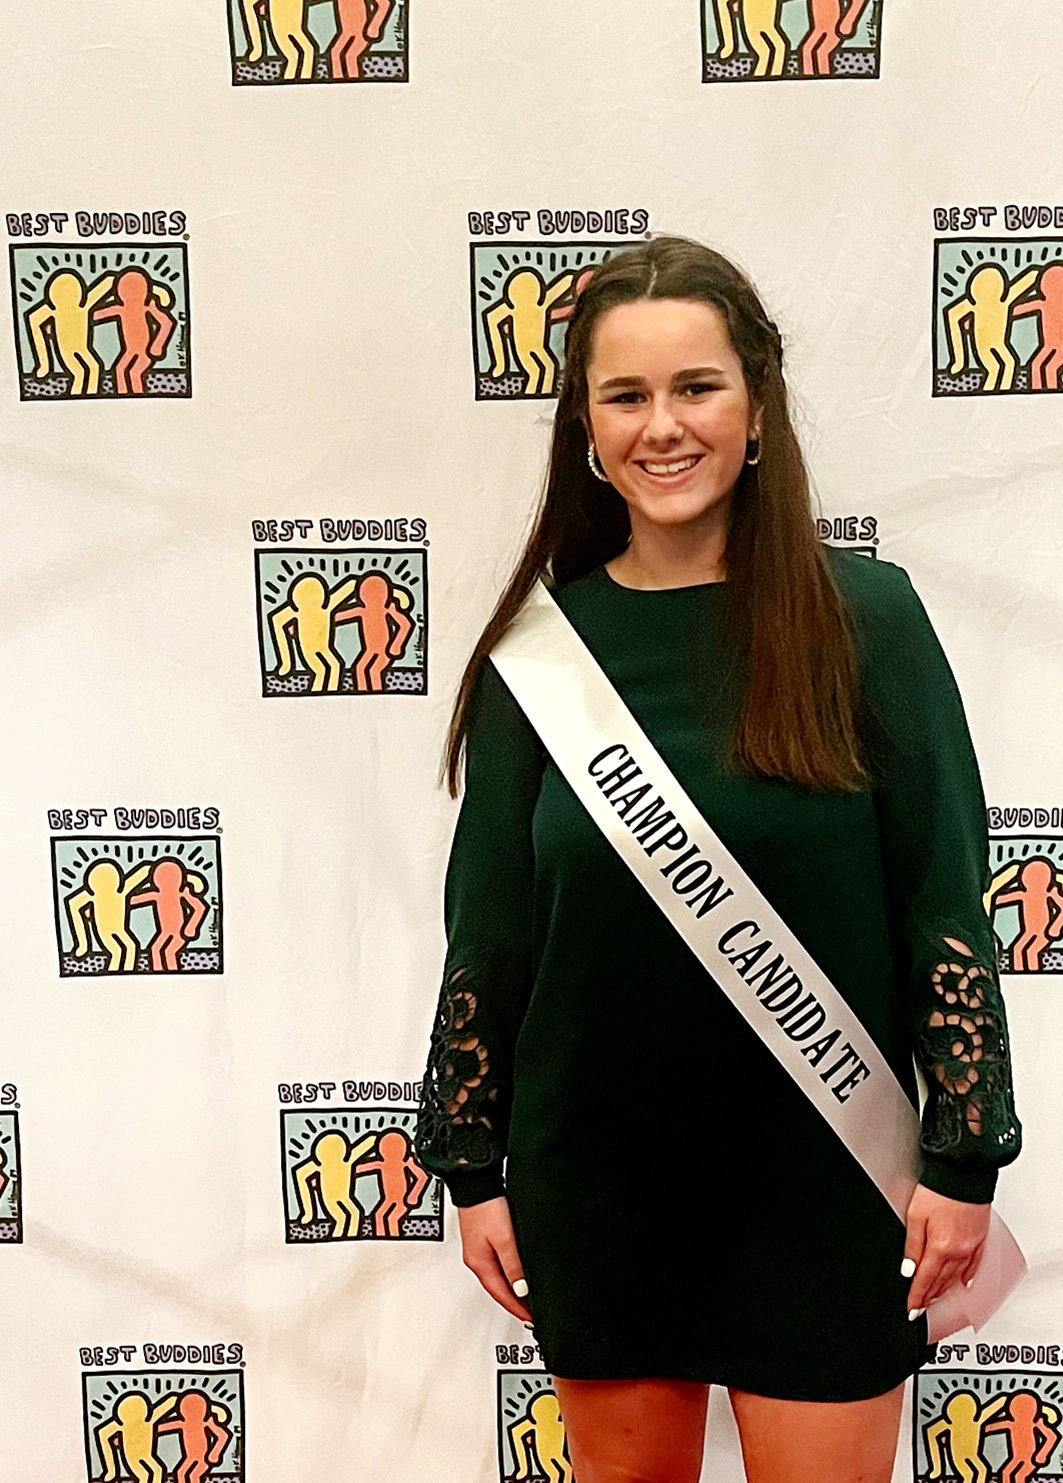 Severna Park High School sophomore Grace Curtin was named a Champion of the Year by the Best Buddies of Maryland program and recognized during a November ceremony in Hunt Valley.